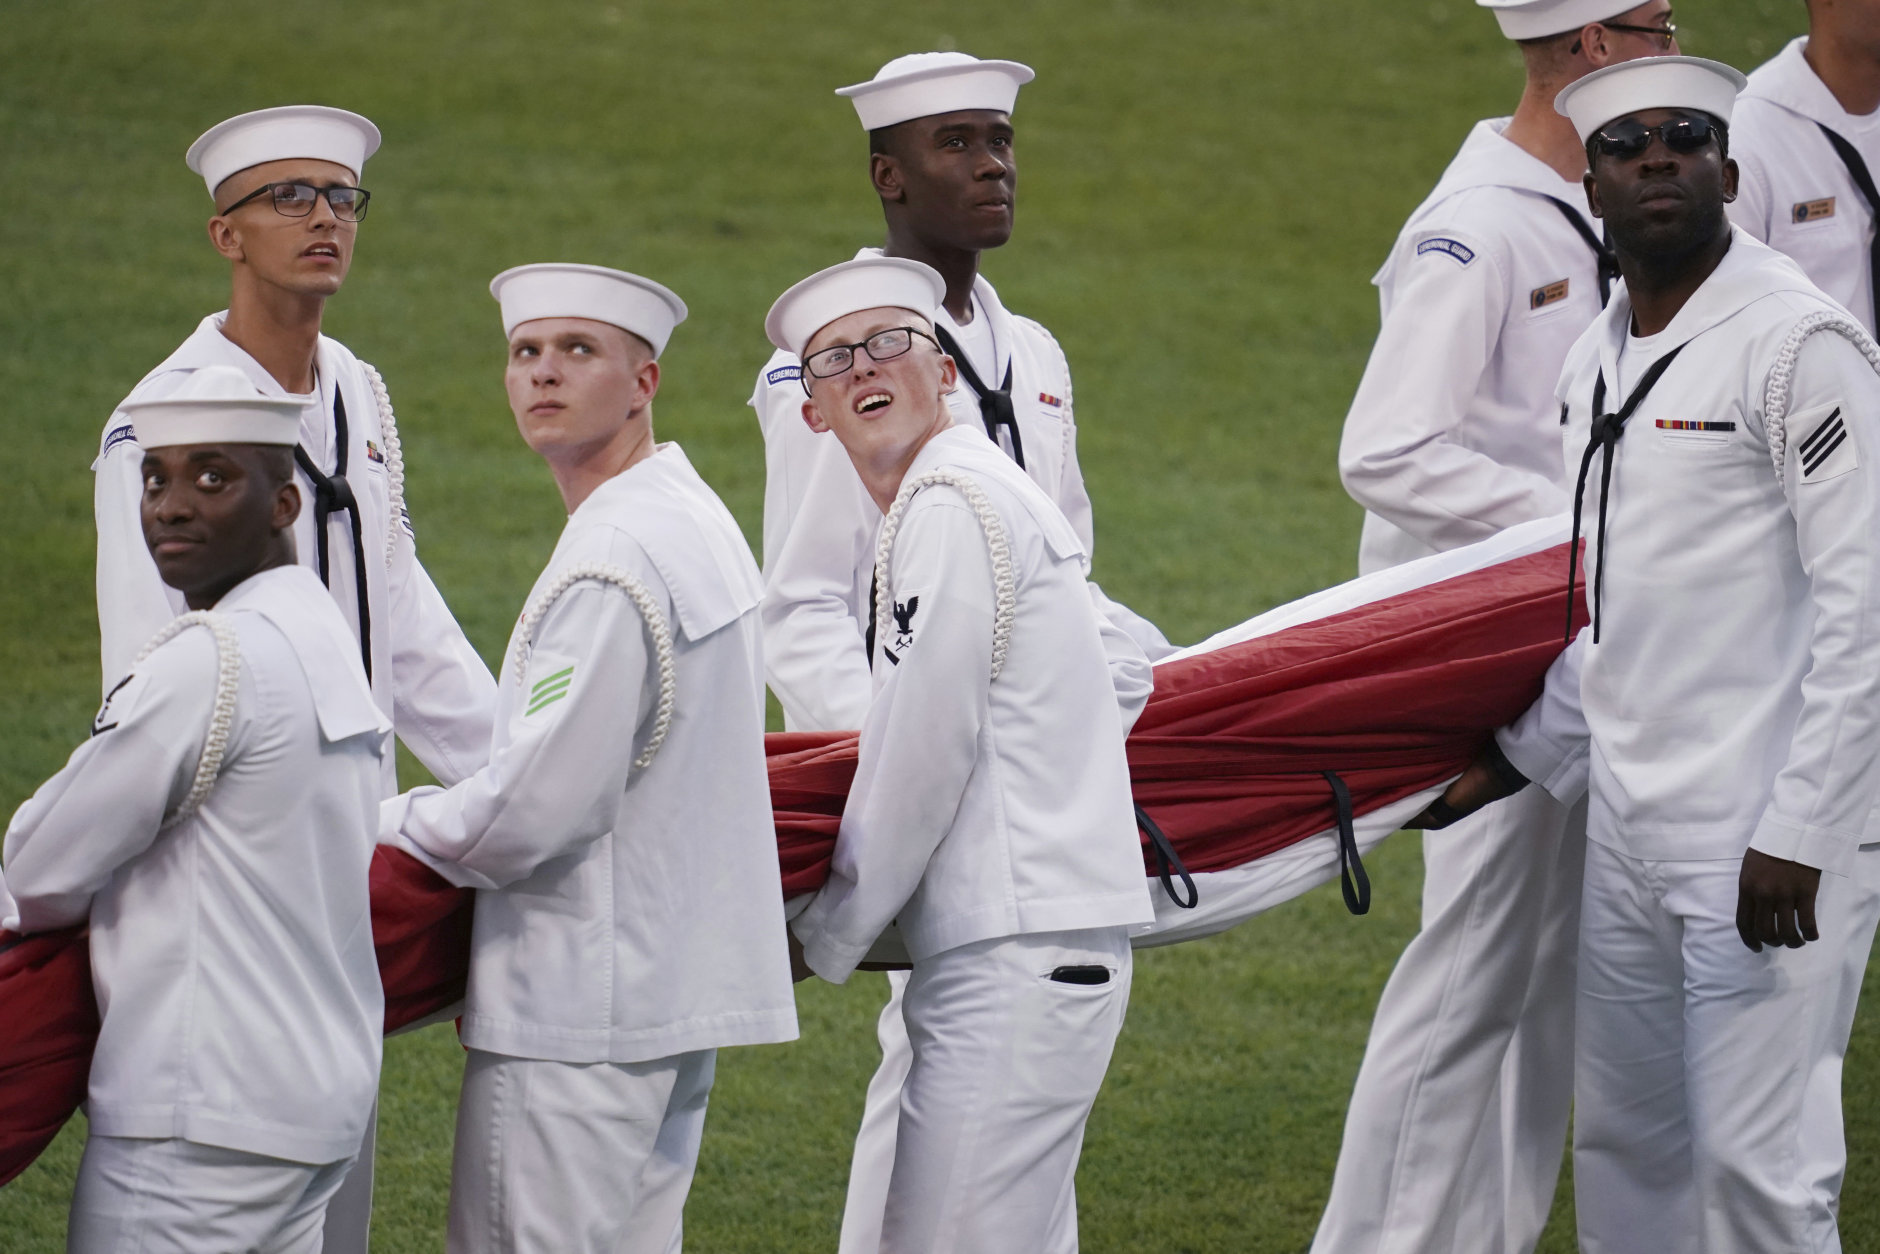 U.S. Navy sailors unfurl a flag before the MLB Home Run Derby, at Nationals Park, Monday, July 16, 2018 in Washington. The 89th MLB baseball All-Star Game will be played Tuesday. (AP Photo/Carolyn Kaster)